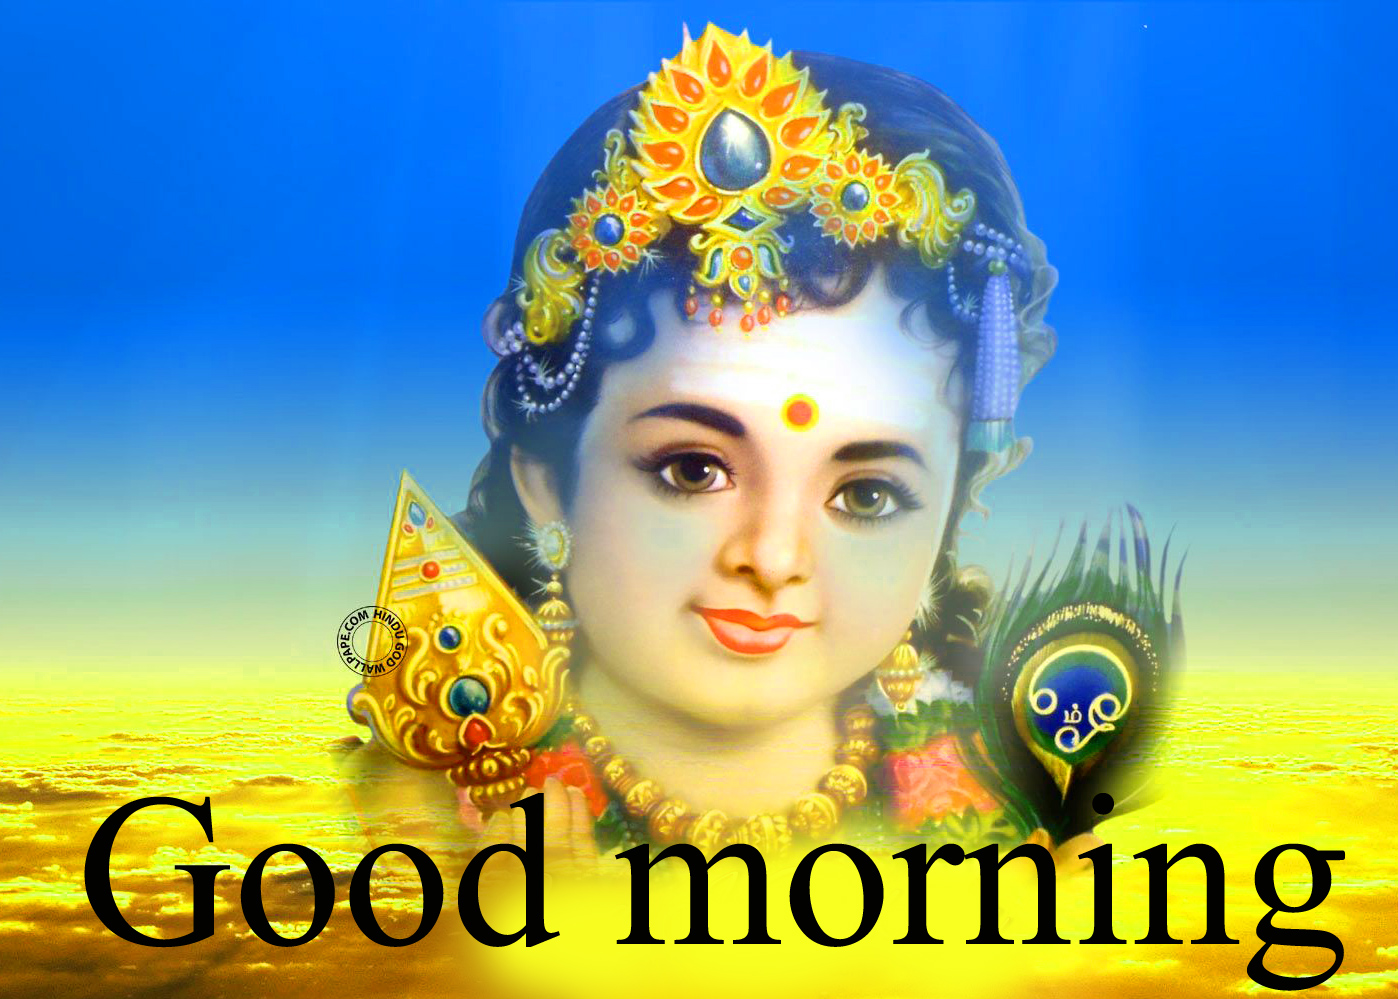 God Good Morning Pictures Images Photo Wallpaper Free Good Morning